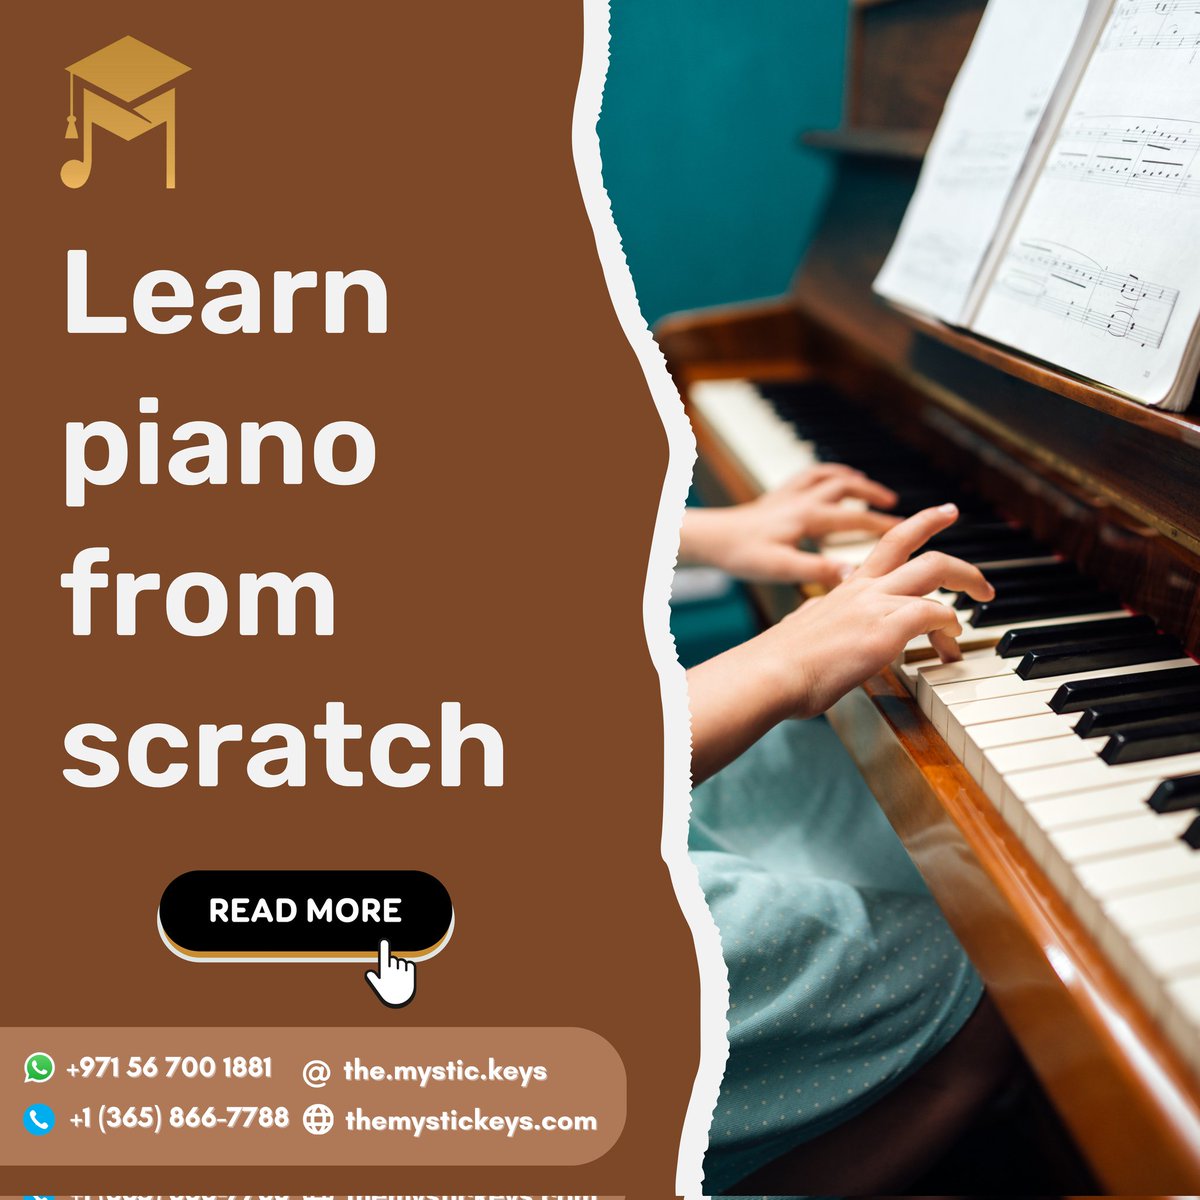 'Wanna learn piano from scratch? This blog dives into 5 effective steps to guide you in your musical pursuit. themystickeys.com/learn-piano-fr… #pianoforbeginners #learnpianofromscratch #pianolessons #pianotutorial #makemusic #blogs #musicblog #themystickeys'